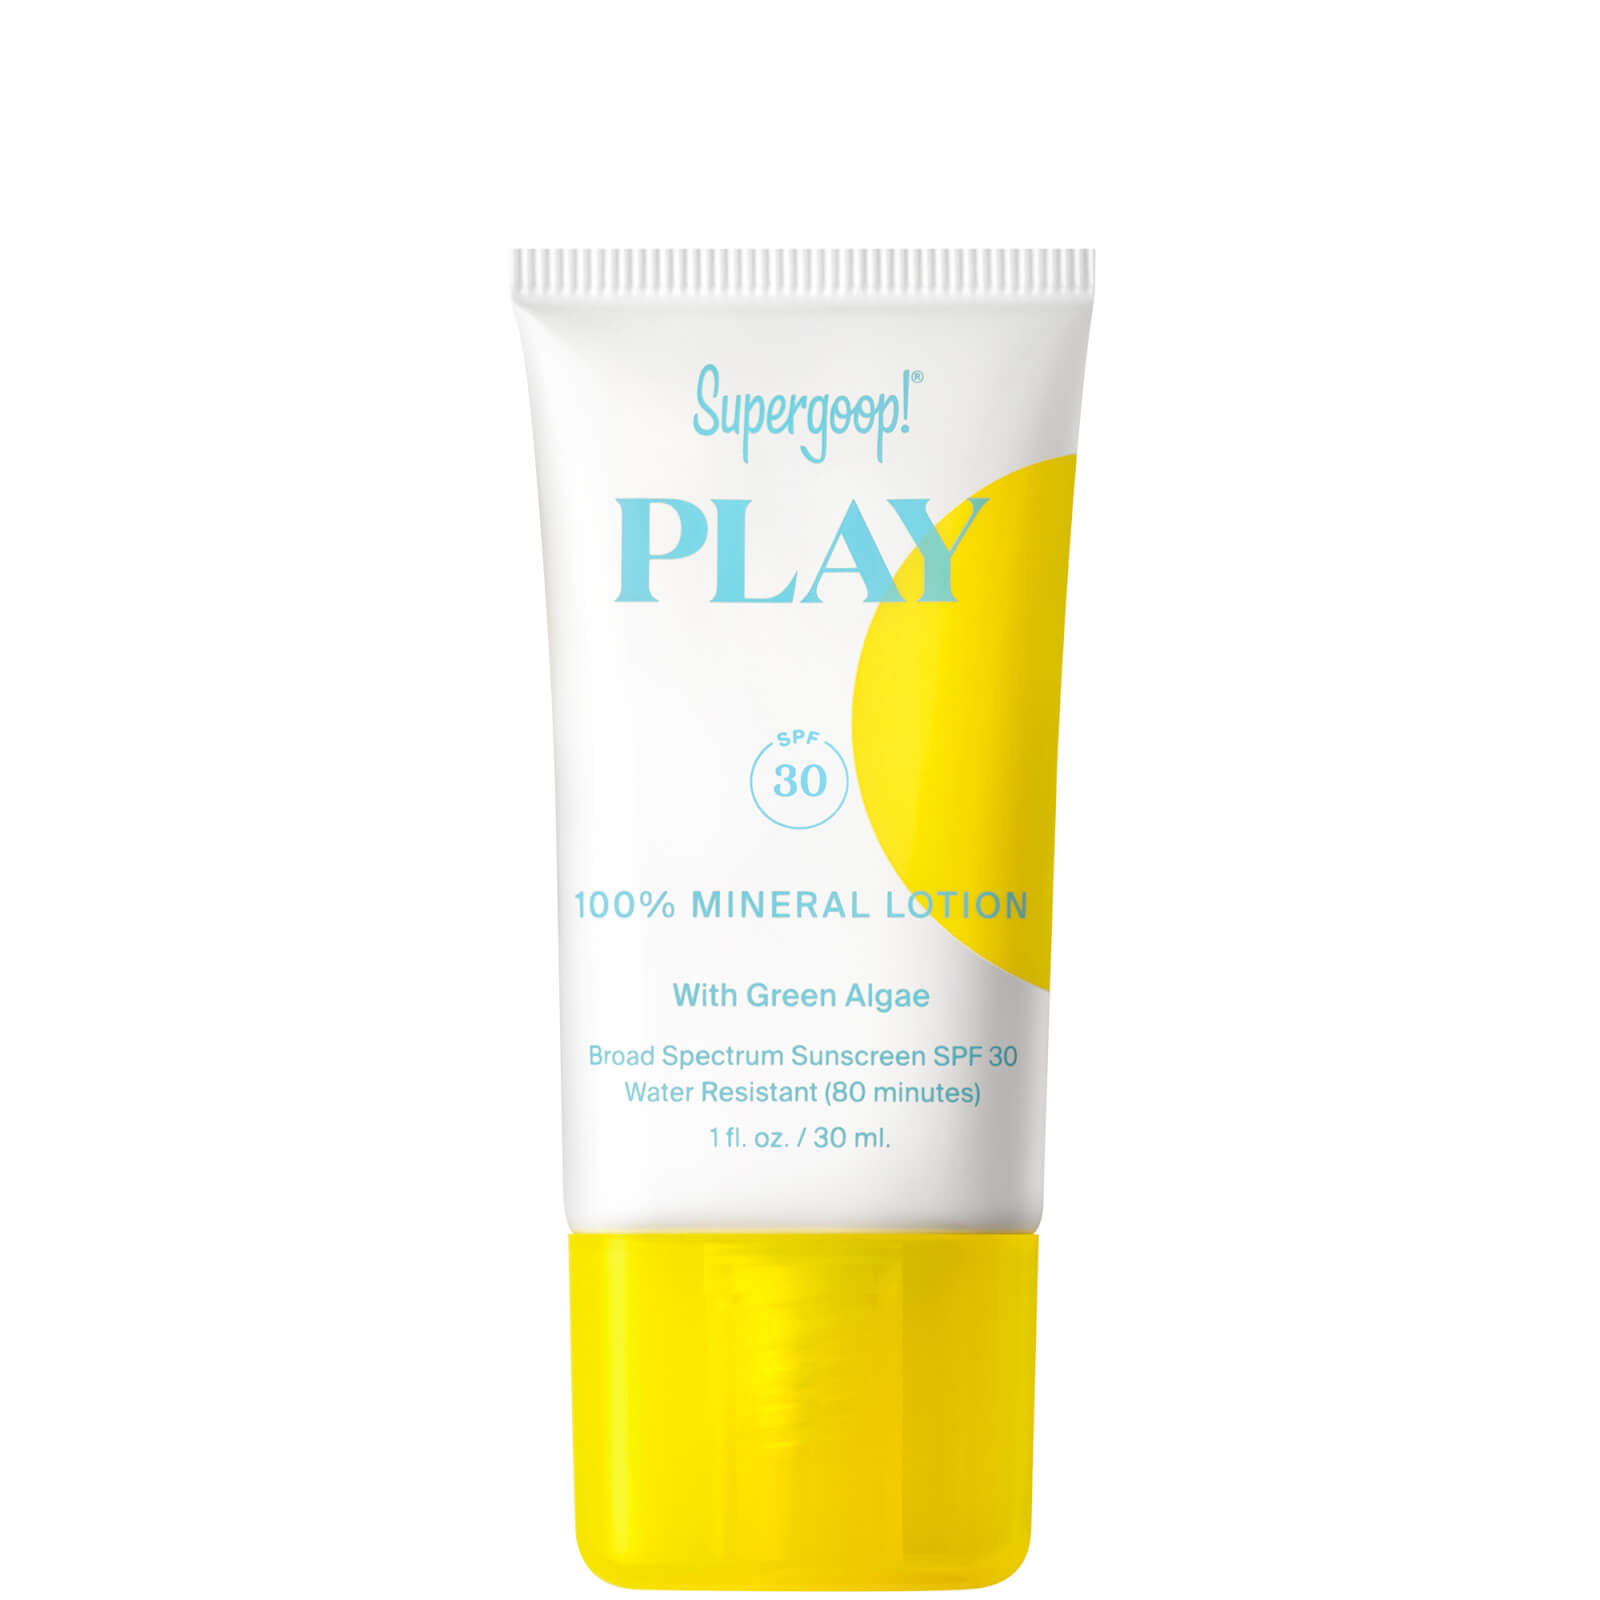 Supergoop Play 100% Mineral Lotion Spf30 With Green Algae 1 Fl. oz